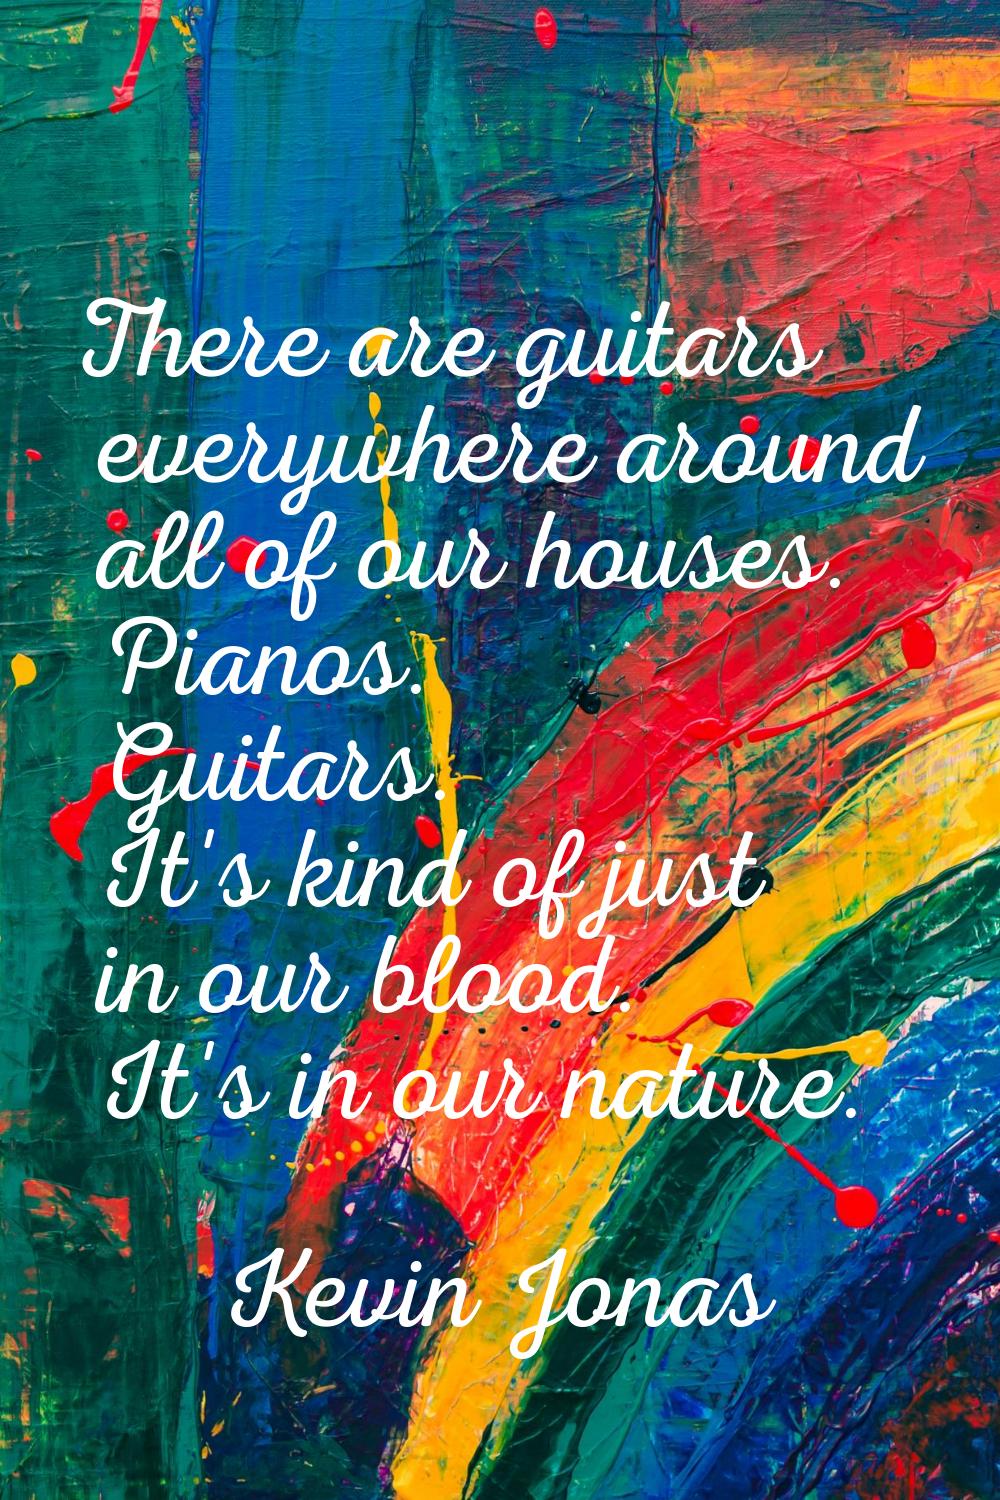 There are guitars everywhere around all of our houses. Pianos. Guitars. It's kind of just in our bl